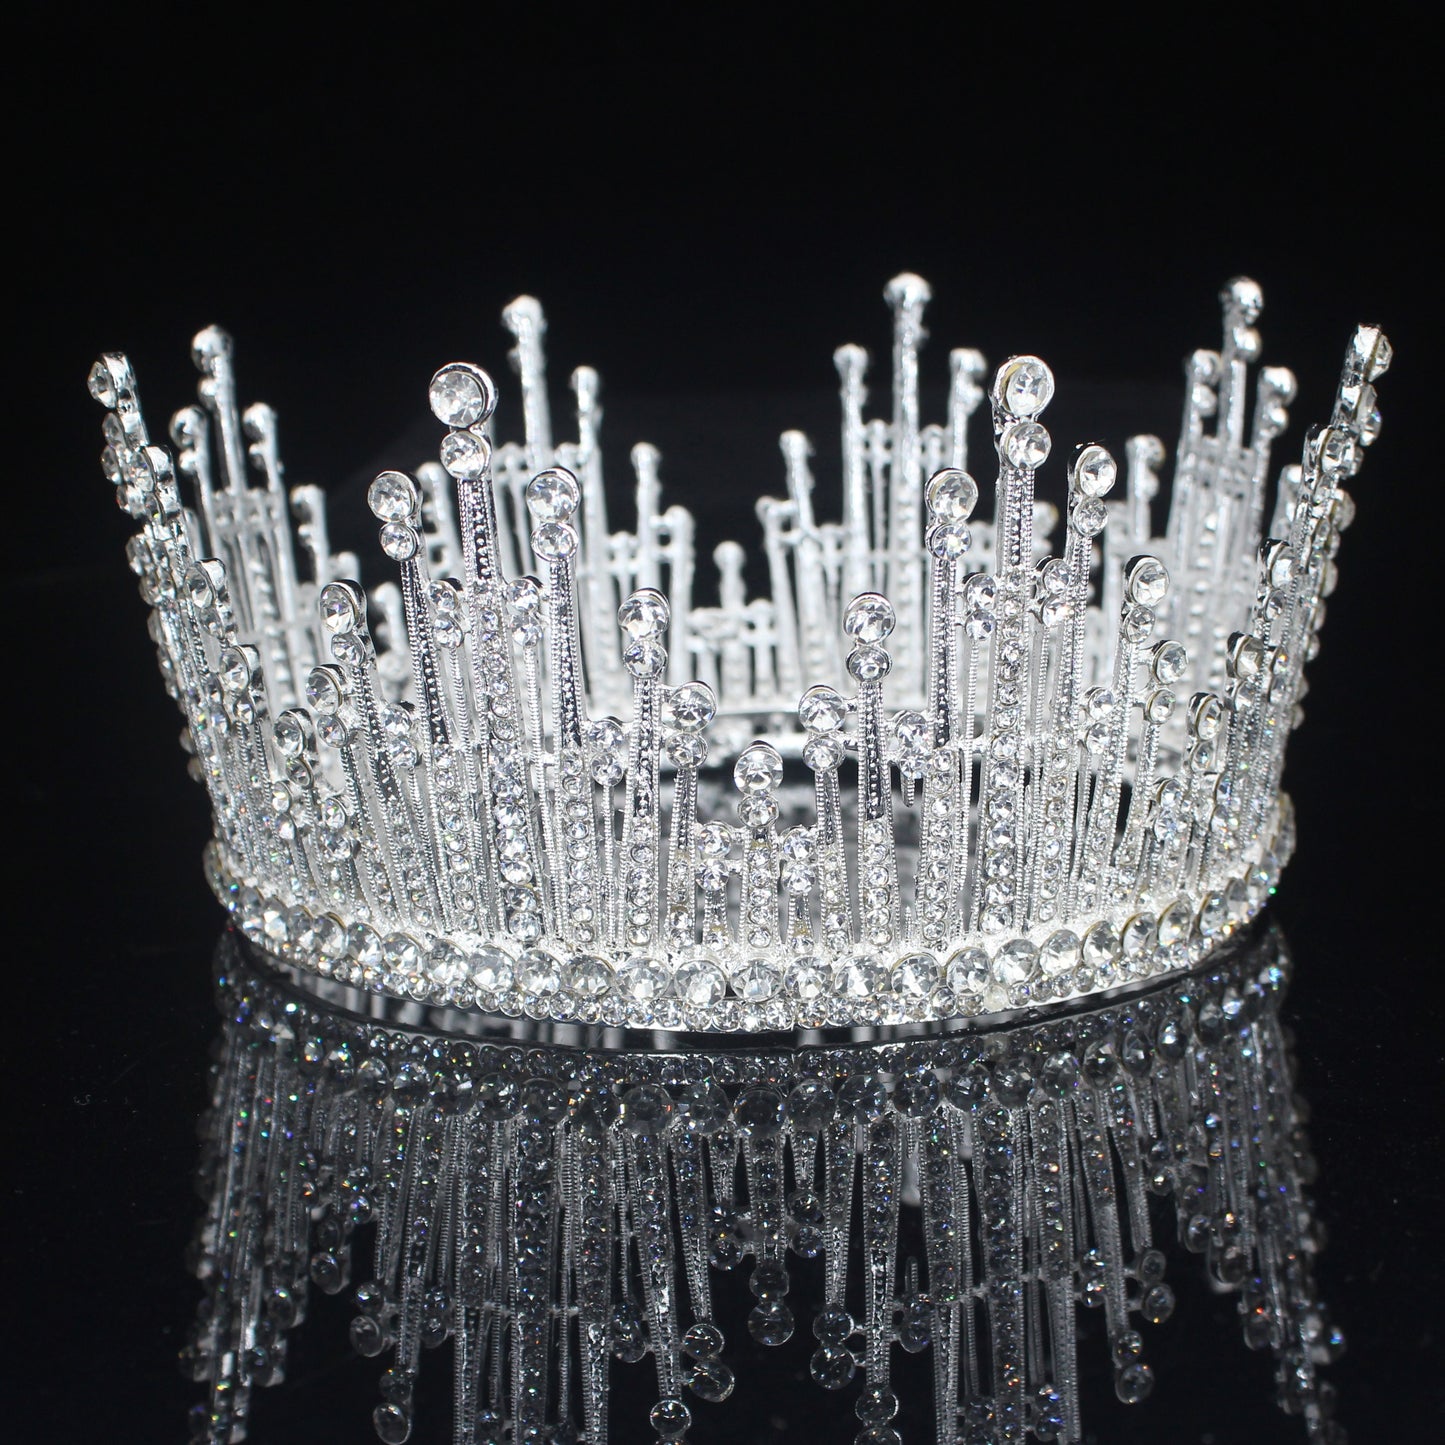 Full Crystal Queen Tiara Crown Wedding Bridal Pageant Hair Ornament Accessory - TulleLux Bridal Crowns &  Accessories 